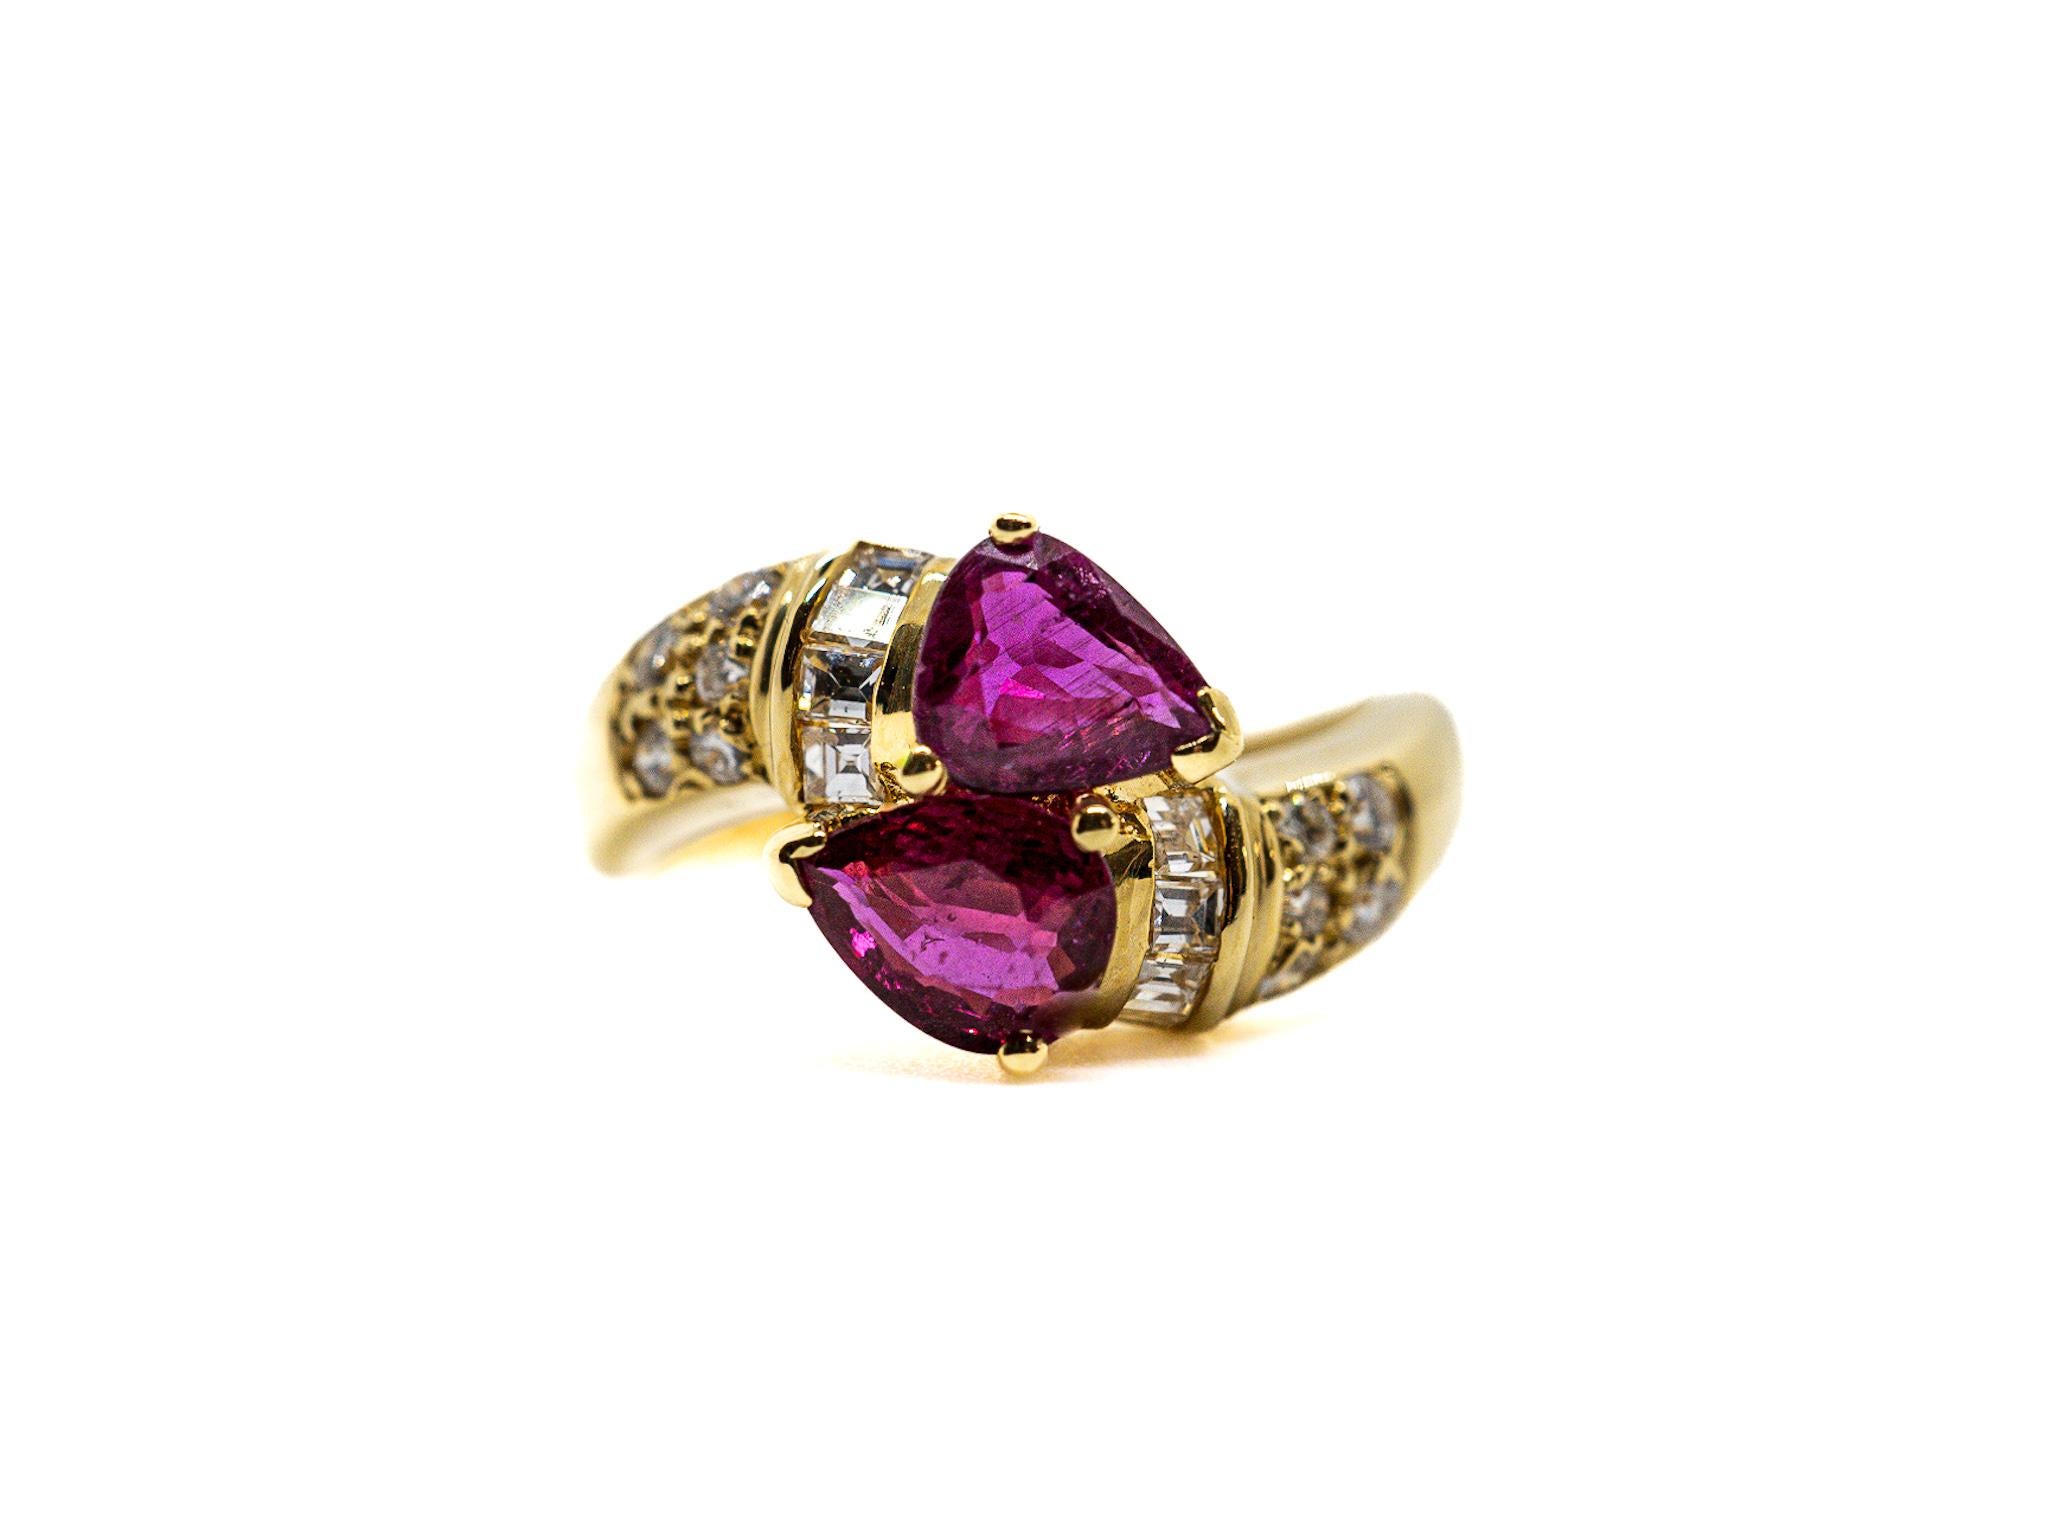 This 18k gold ring features two pear-shaped rubies, surrounded by a cluster of baguette diamonds and smaller diamonds with total weight approximately 0,5 ct. 

The rubies add a pop of vibrant red color to the ring, while the diamonds provide a